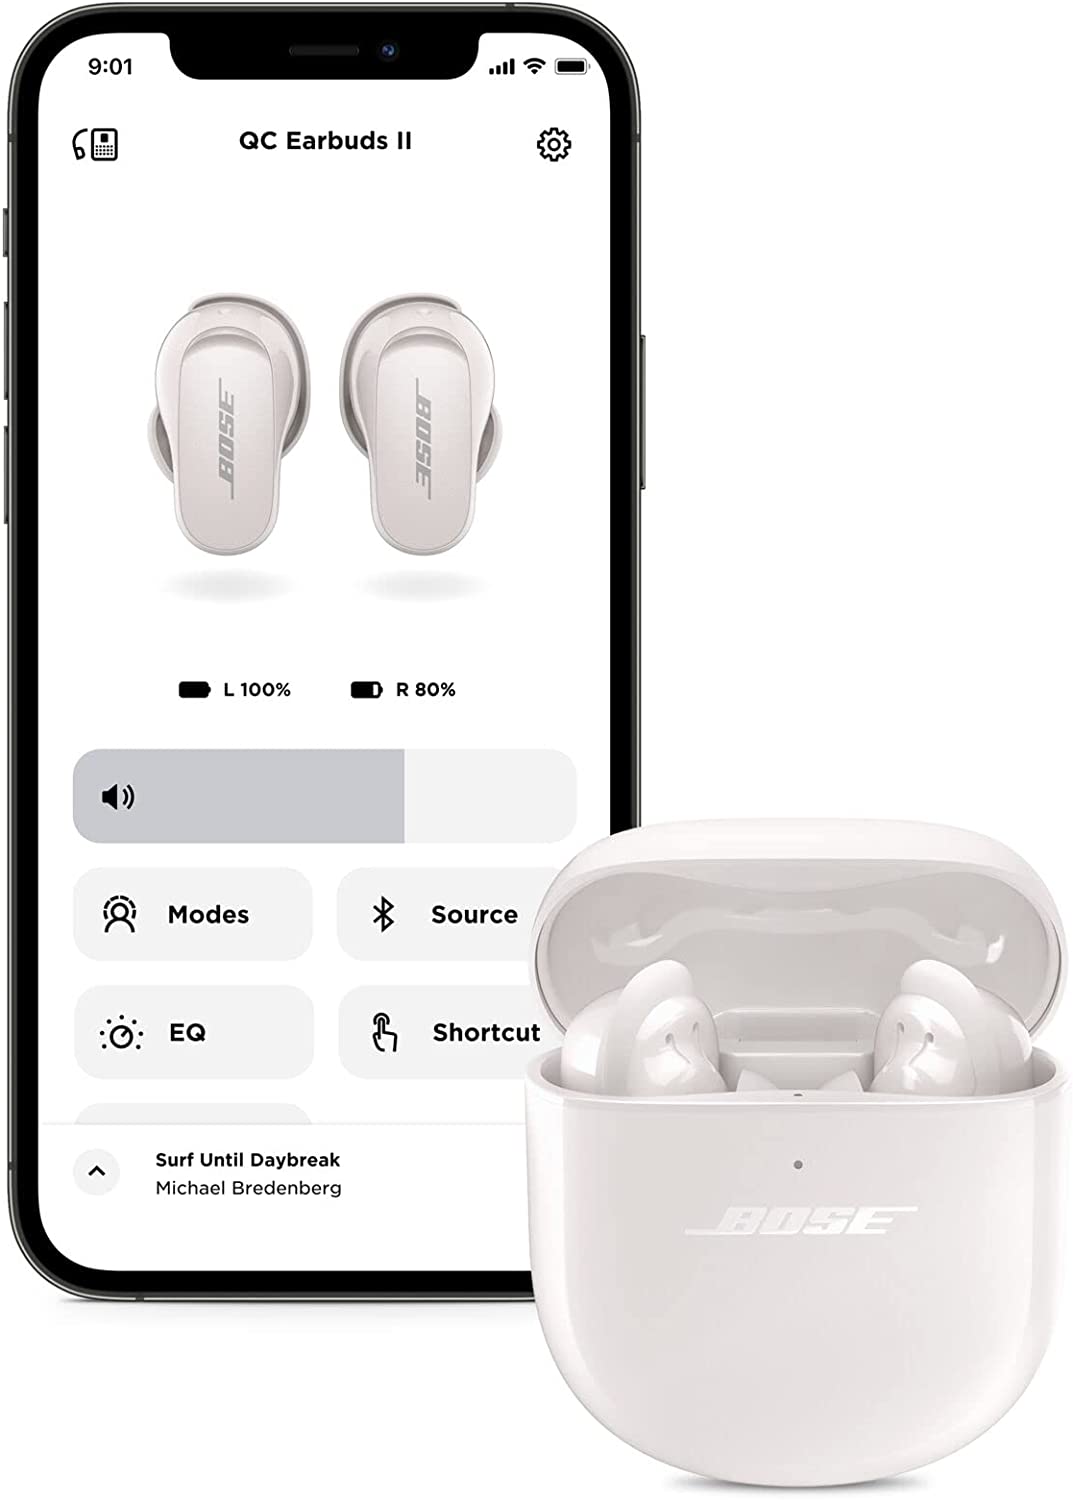 Samsung Galaxy Buds 2 Pro Deals: Save Up to $80 on These Top-Rated Earbuds  - CNET